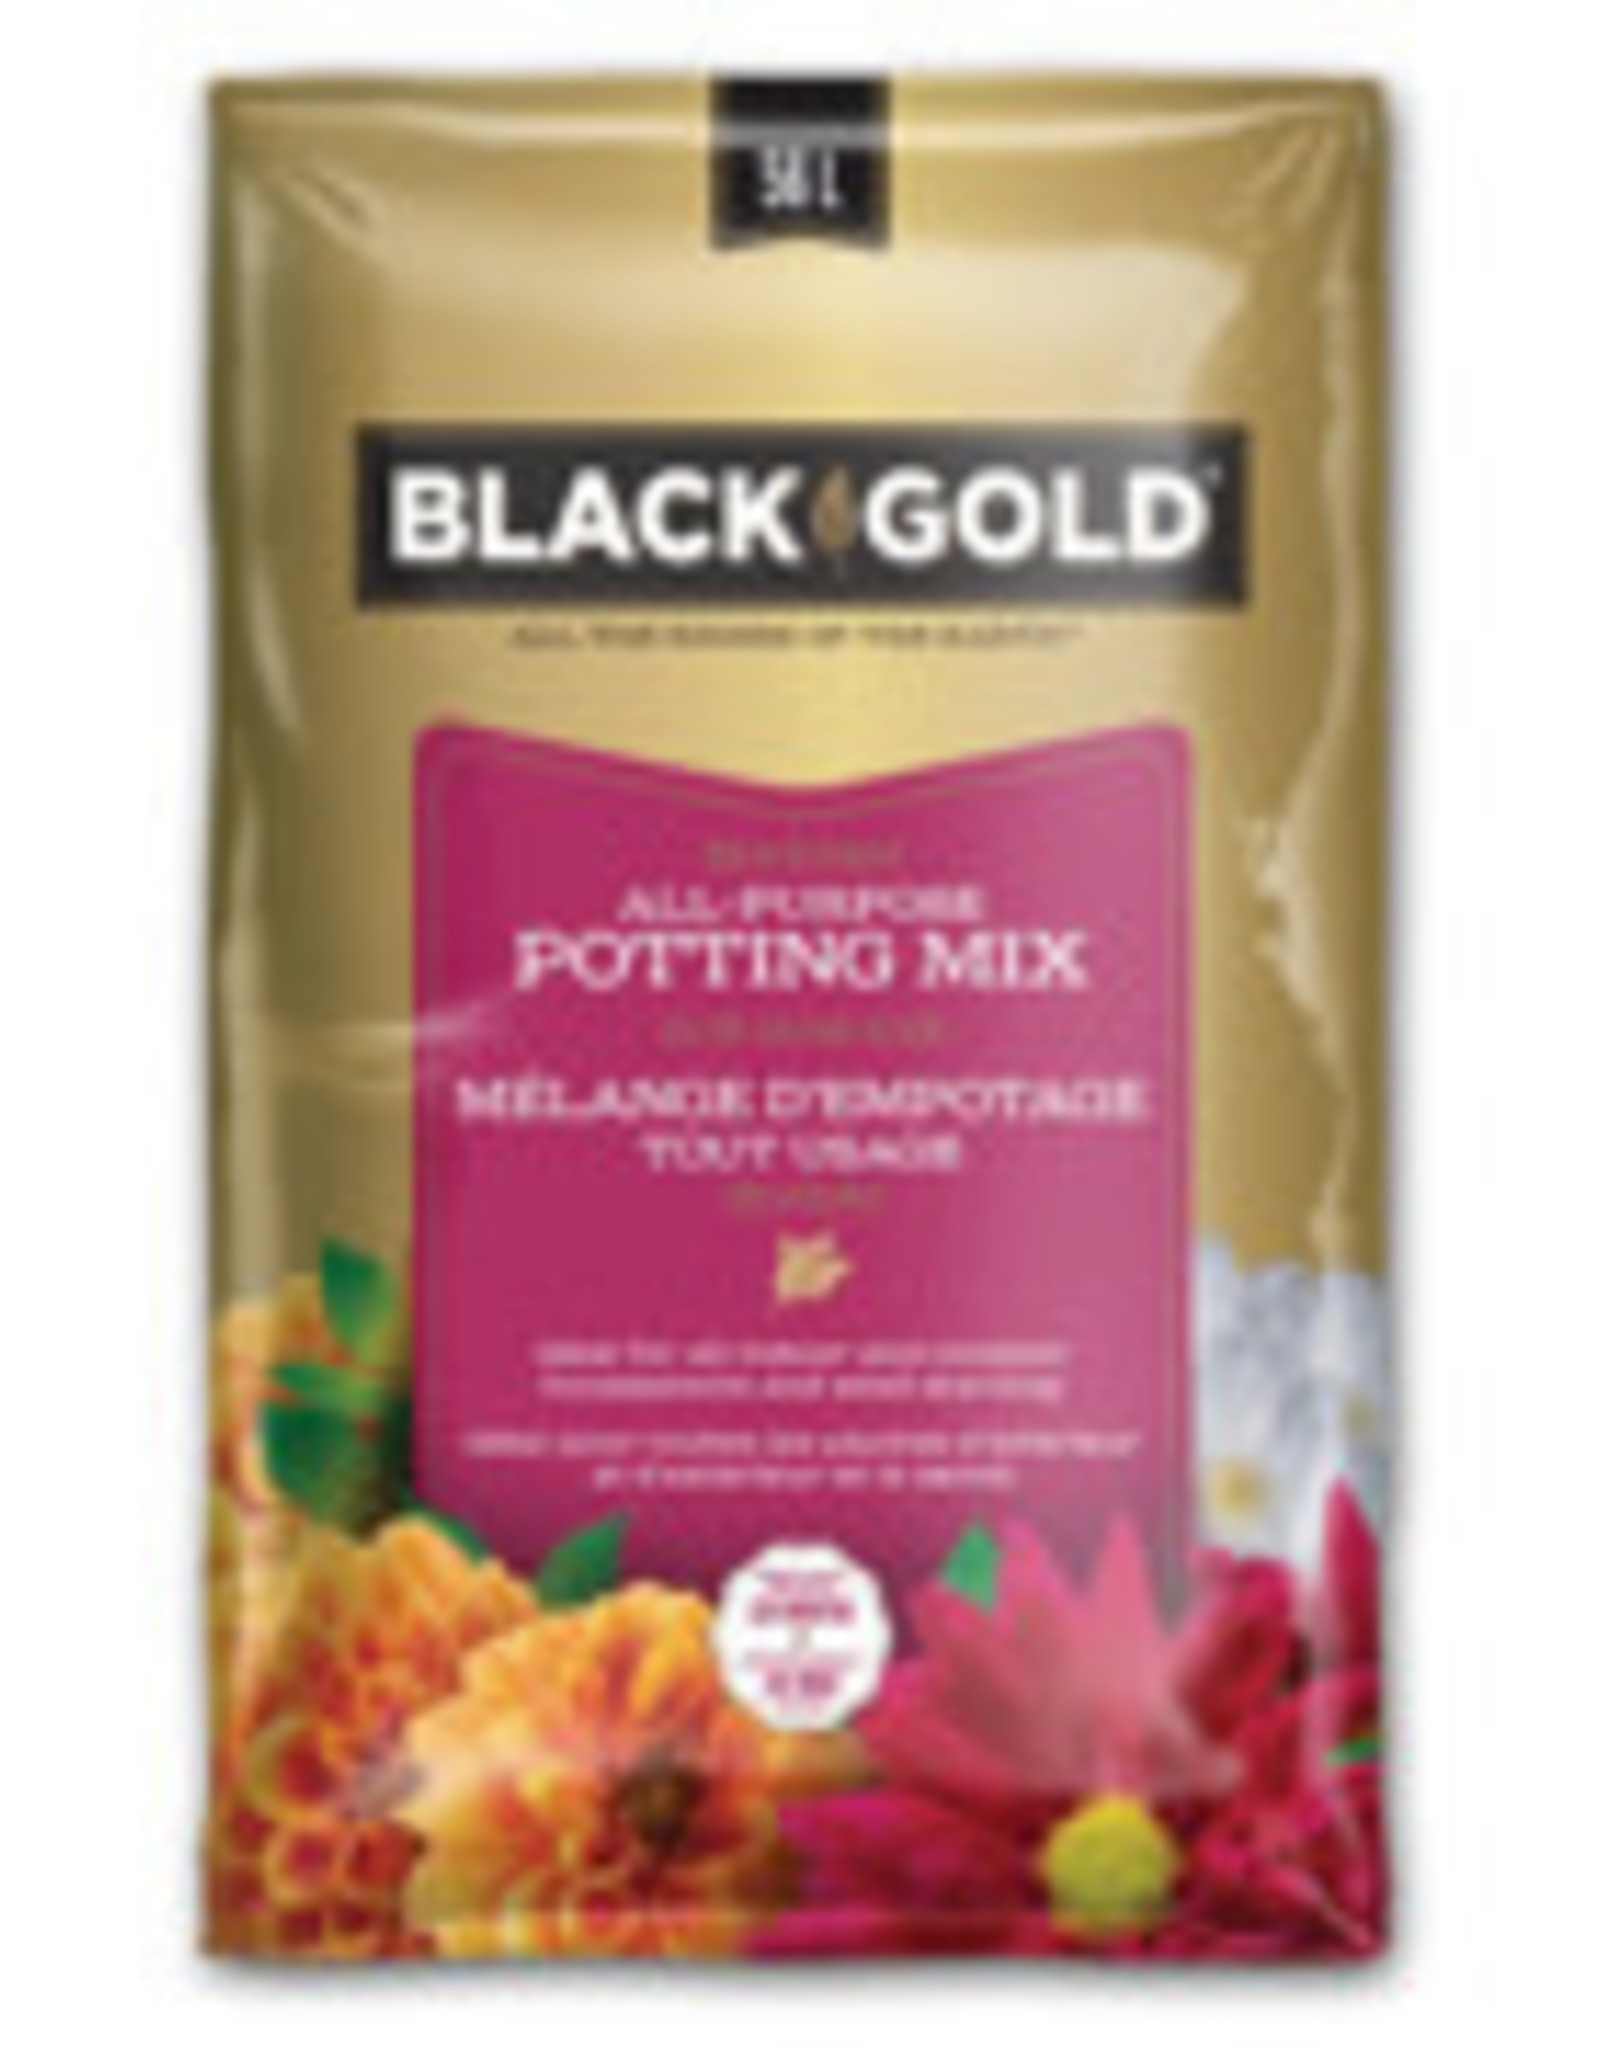 Sun Gro Horticulture Canada Black Gold Enriched All Purpose Potting Mix 12L